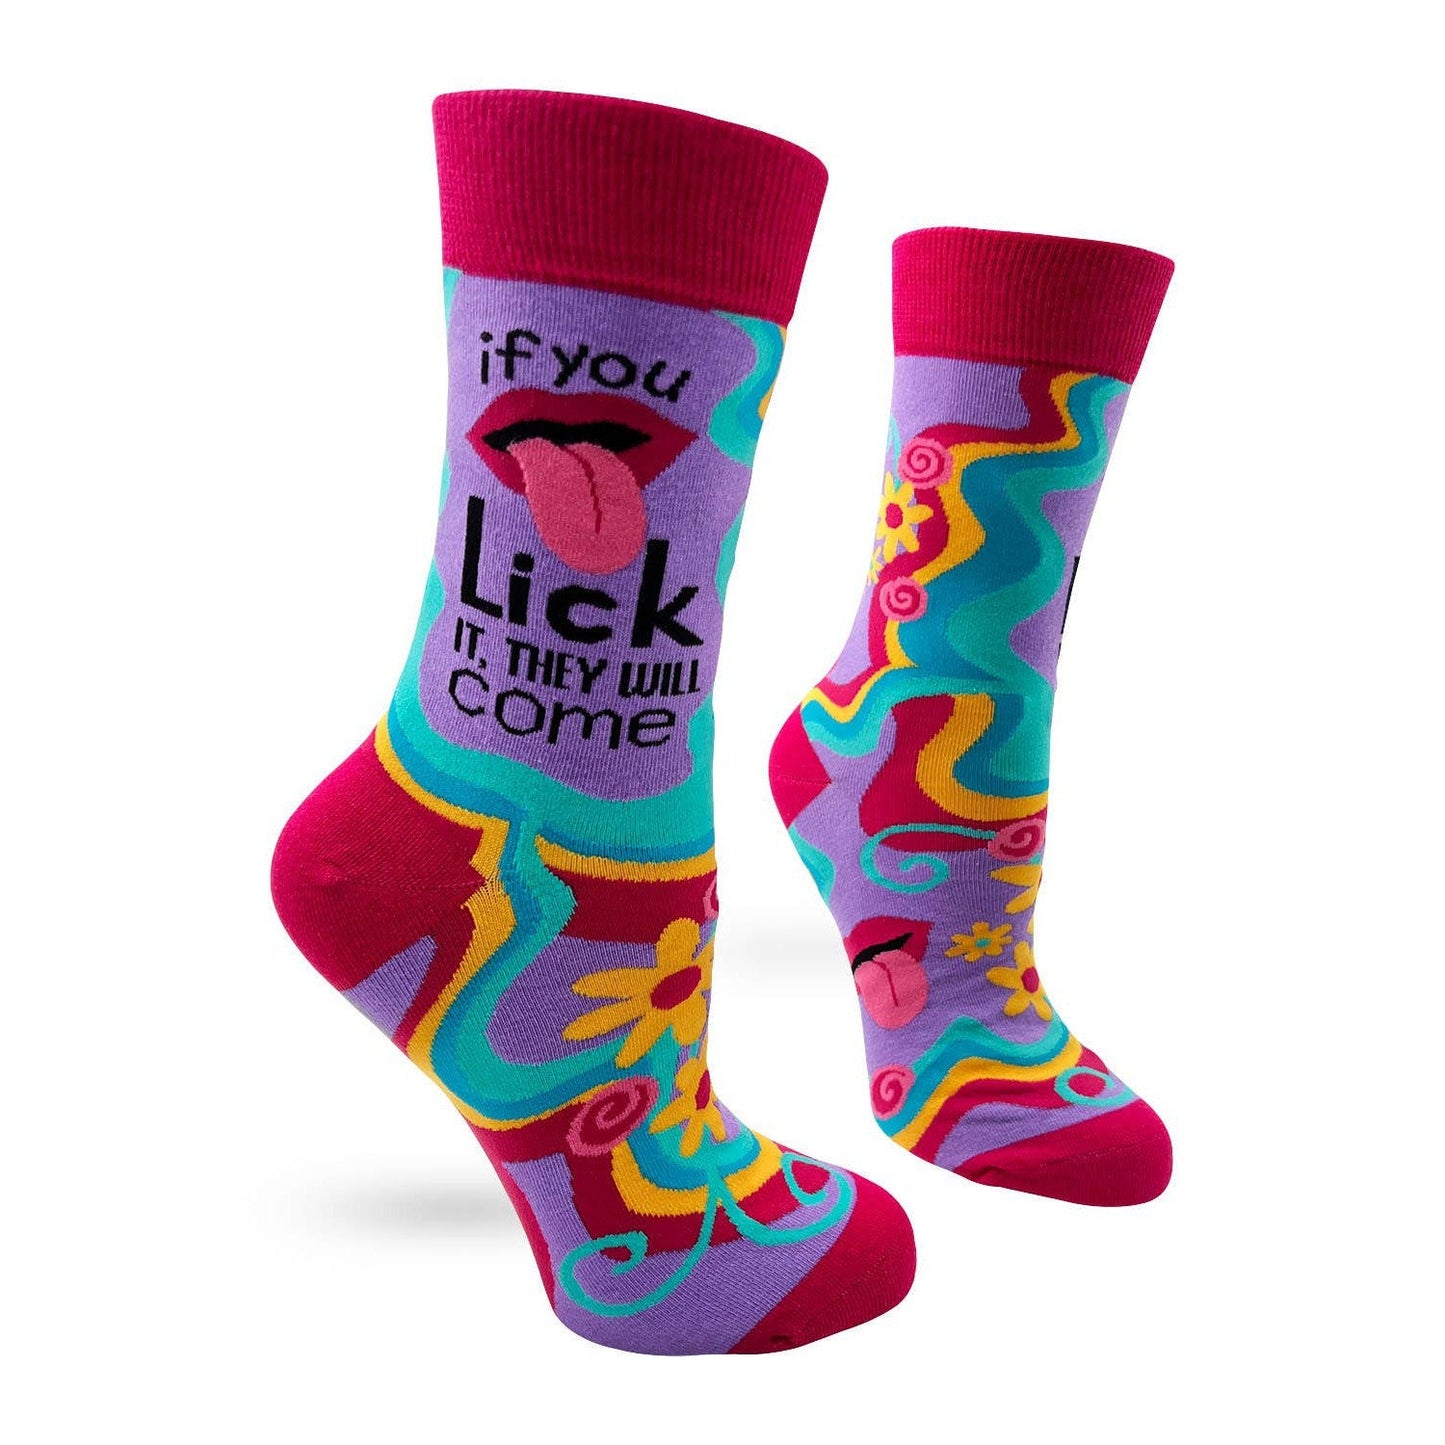 If You Lick It They Will Come Funny Women's Crew Socks